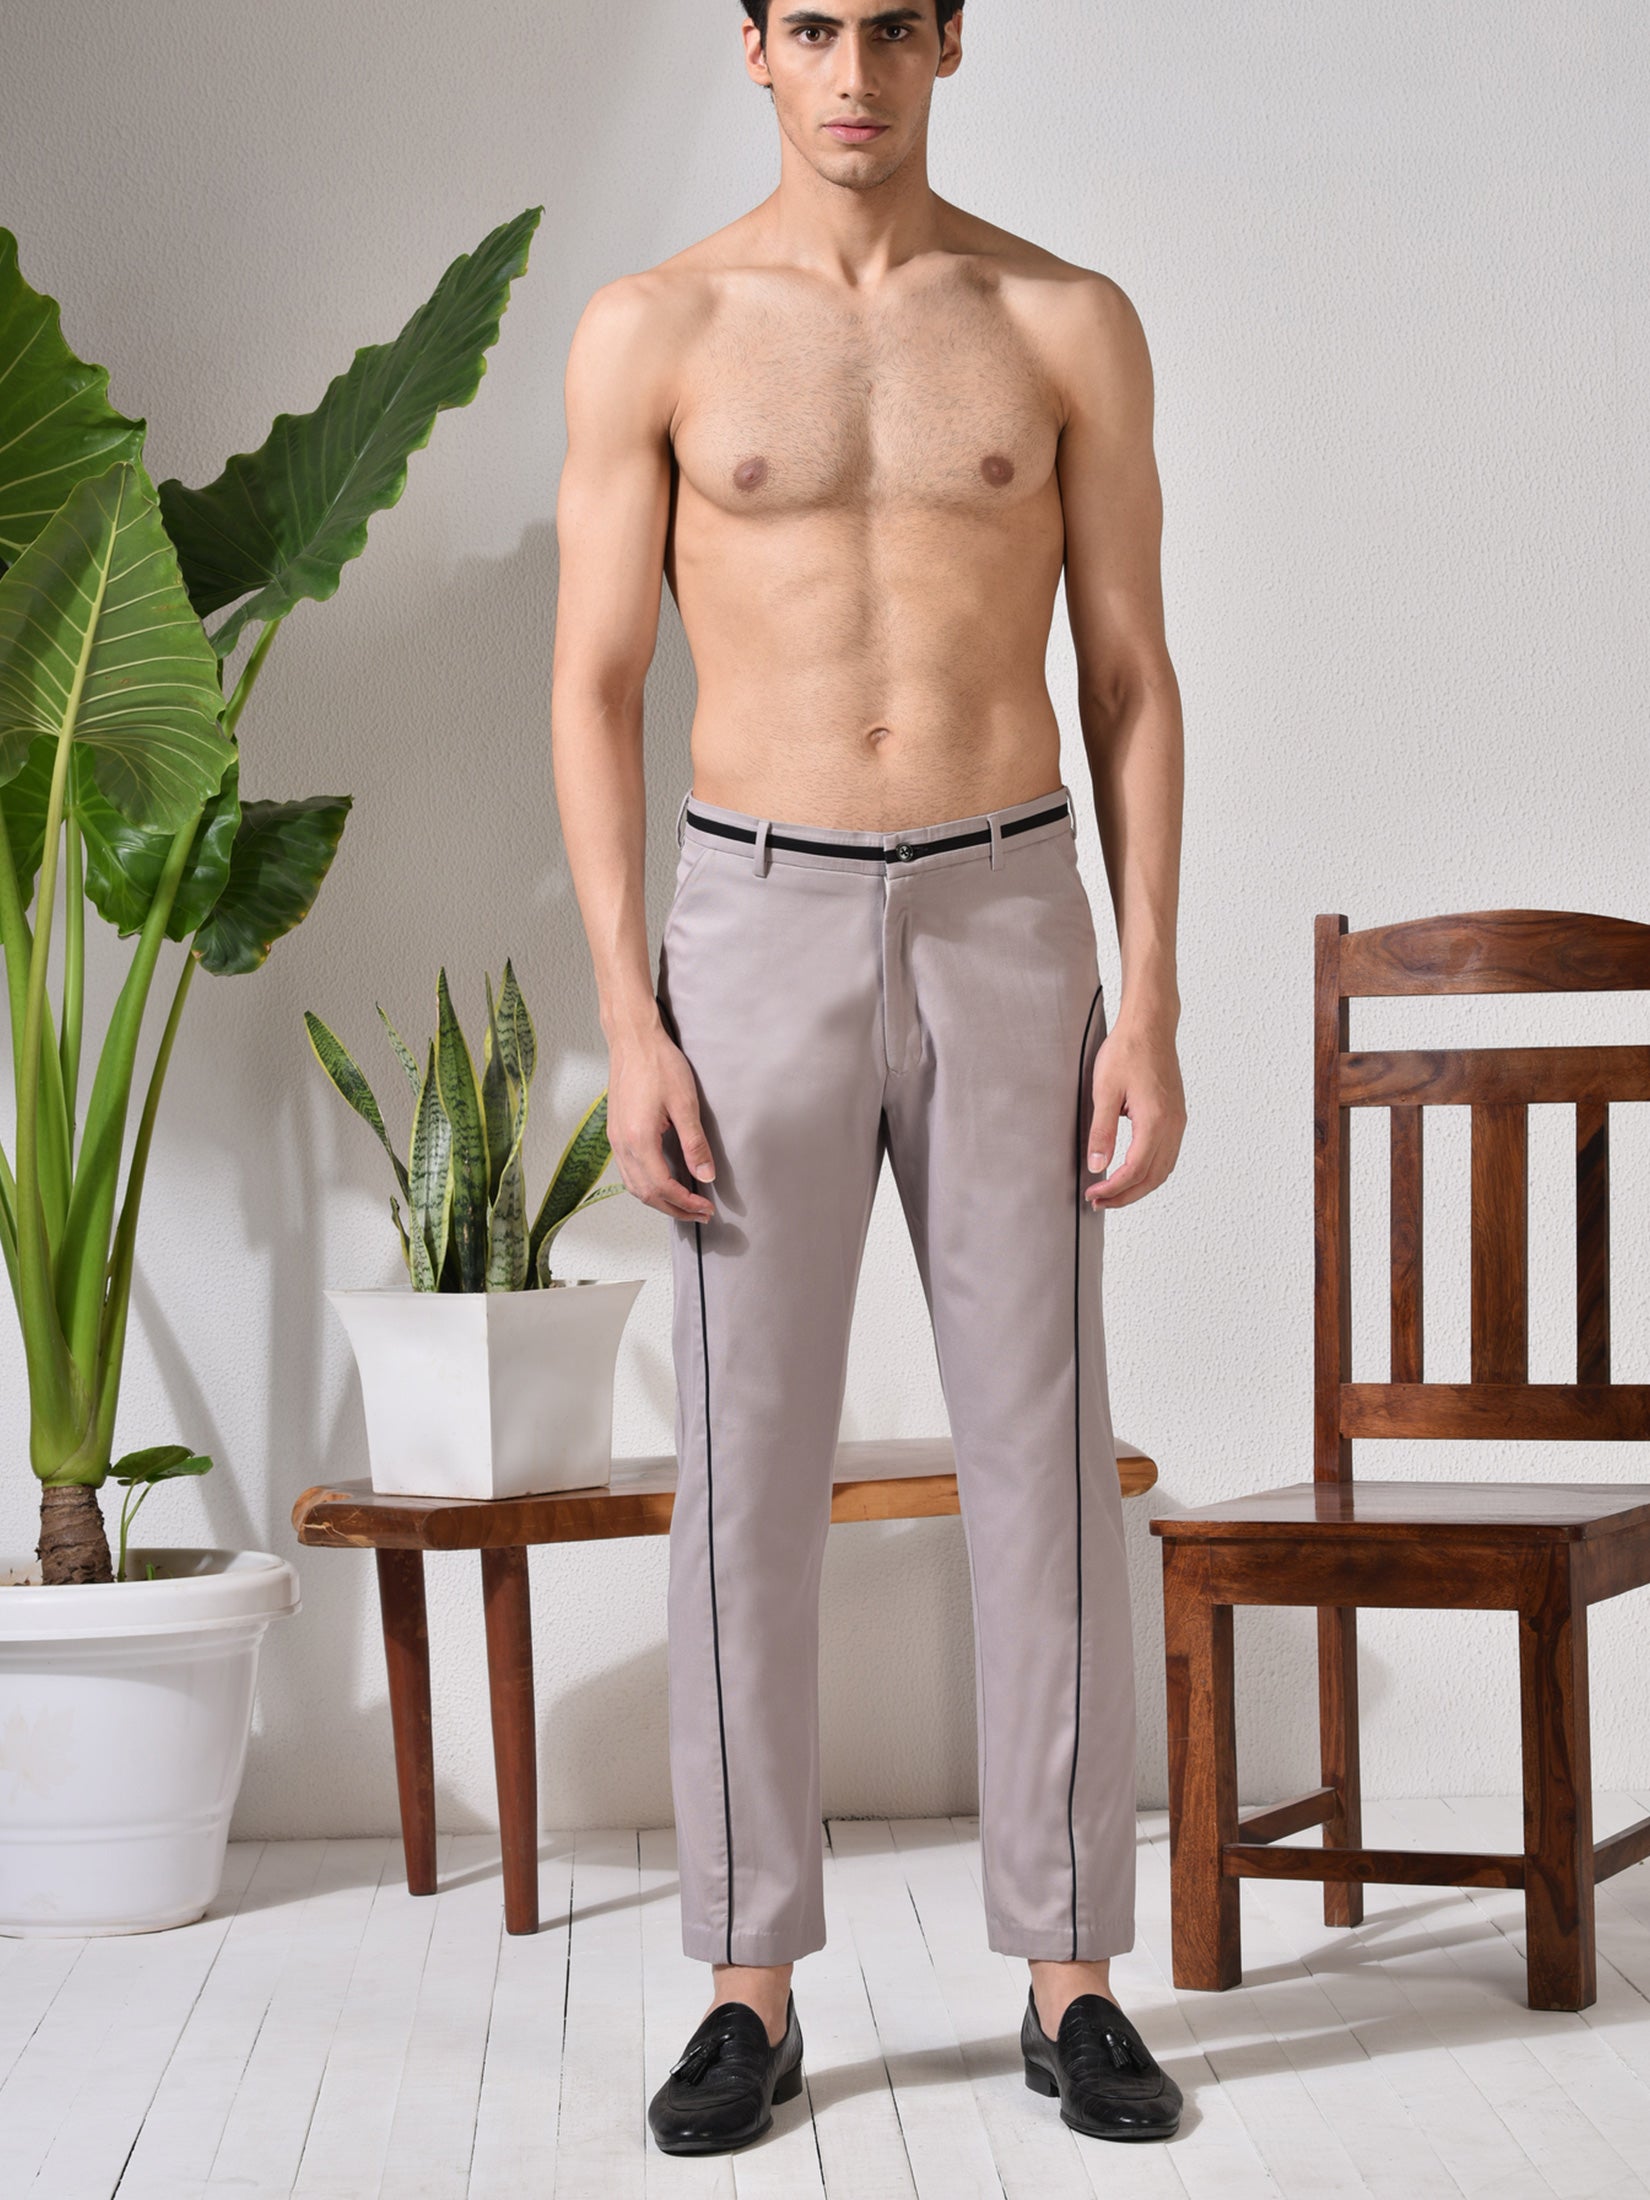 Insignia, Pastel Beige Trouser With Black Highlights